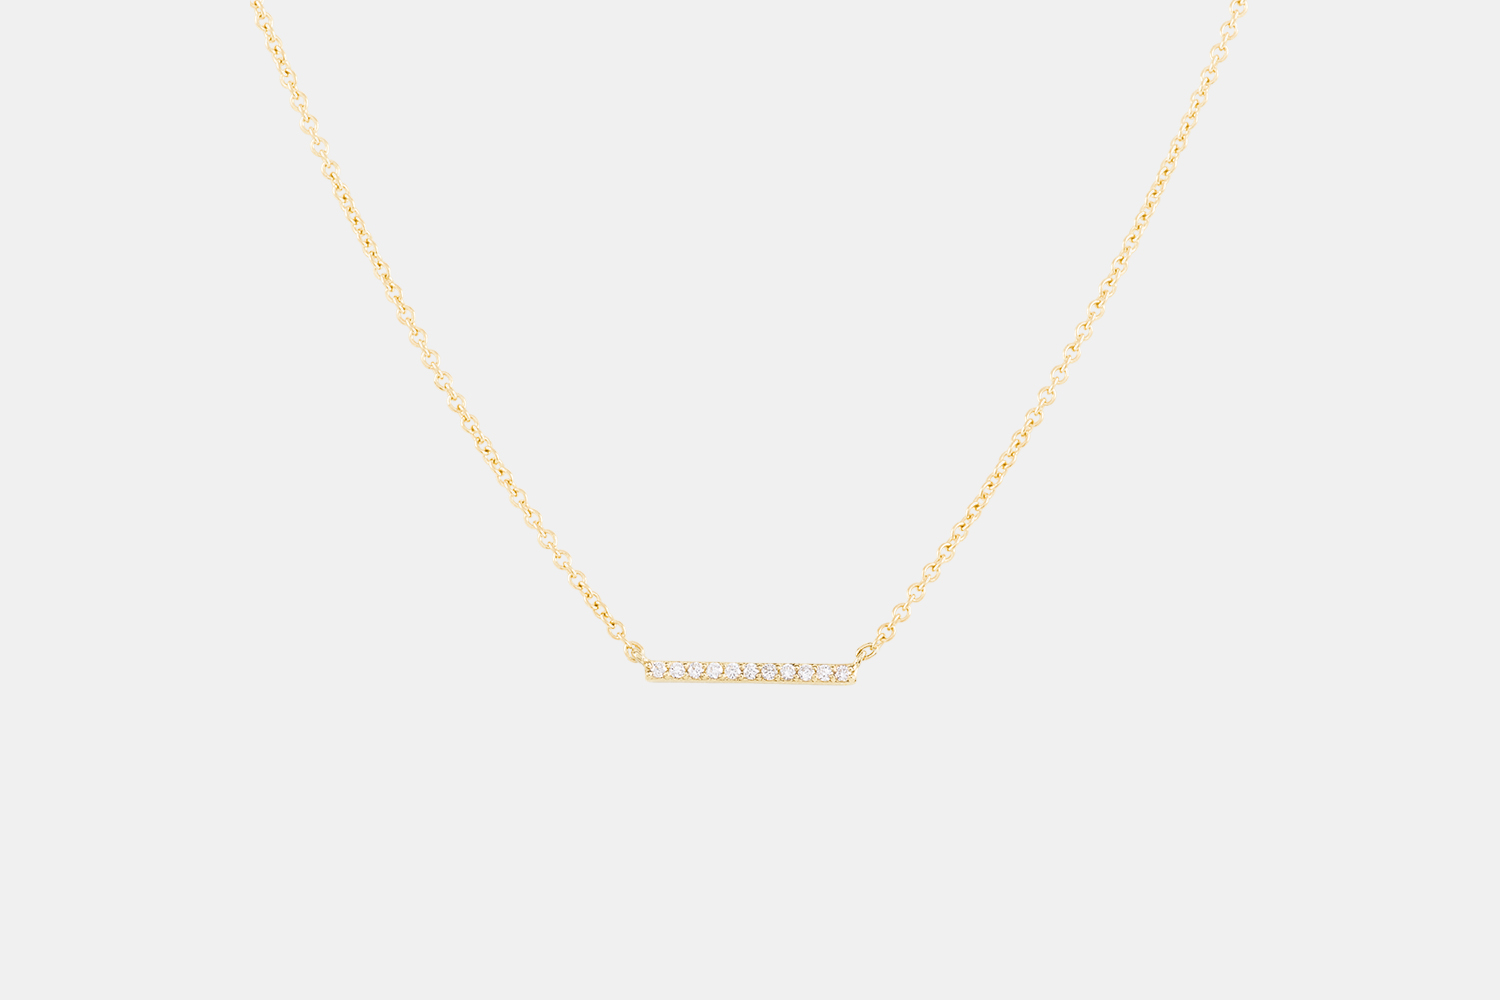 This 'Diamonds Line' necklace from Mejuri is a no-brainer